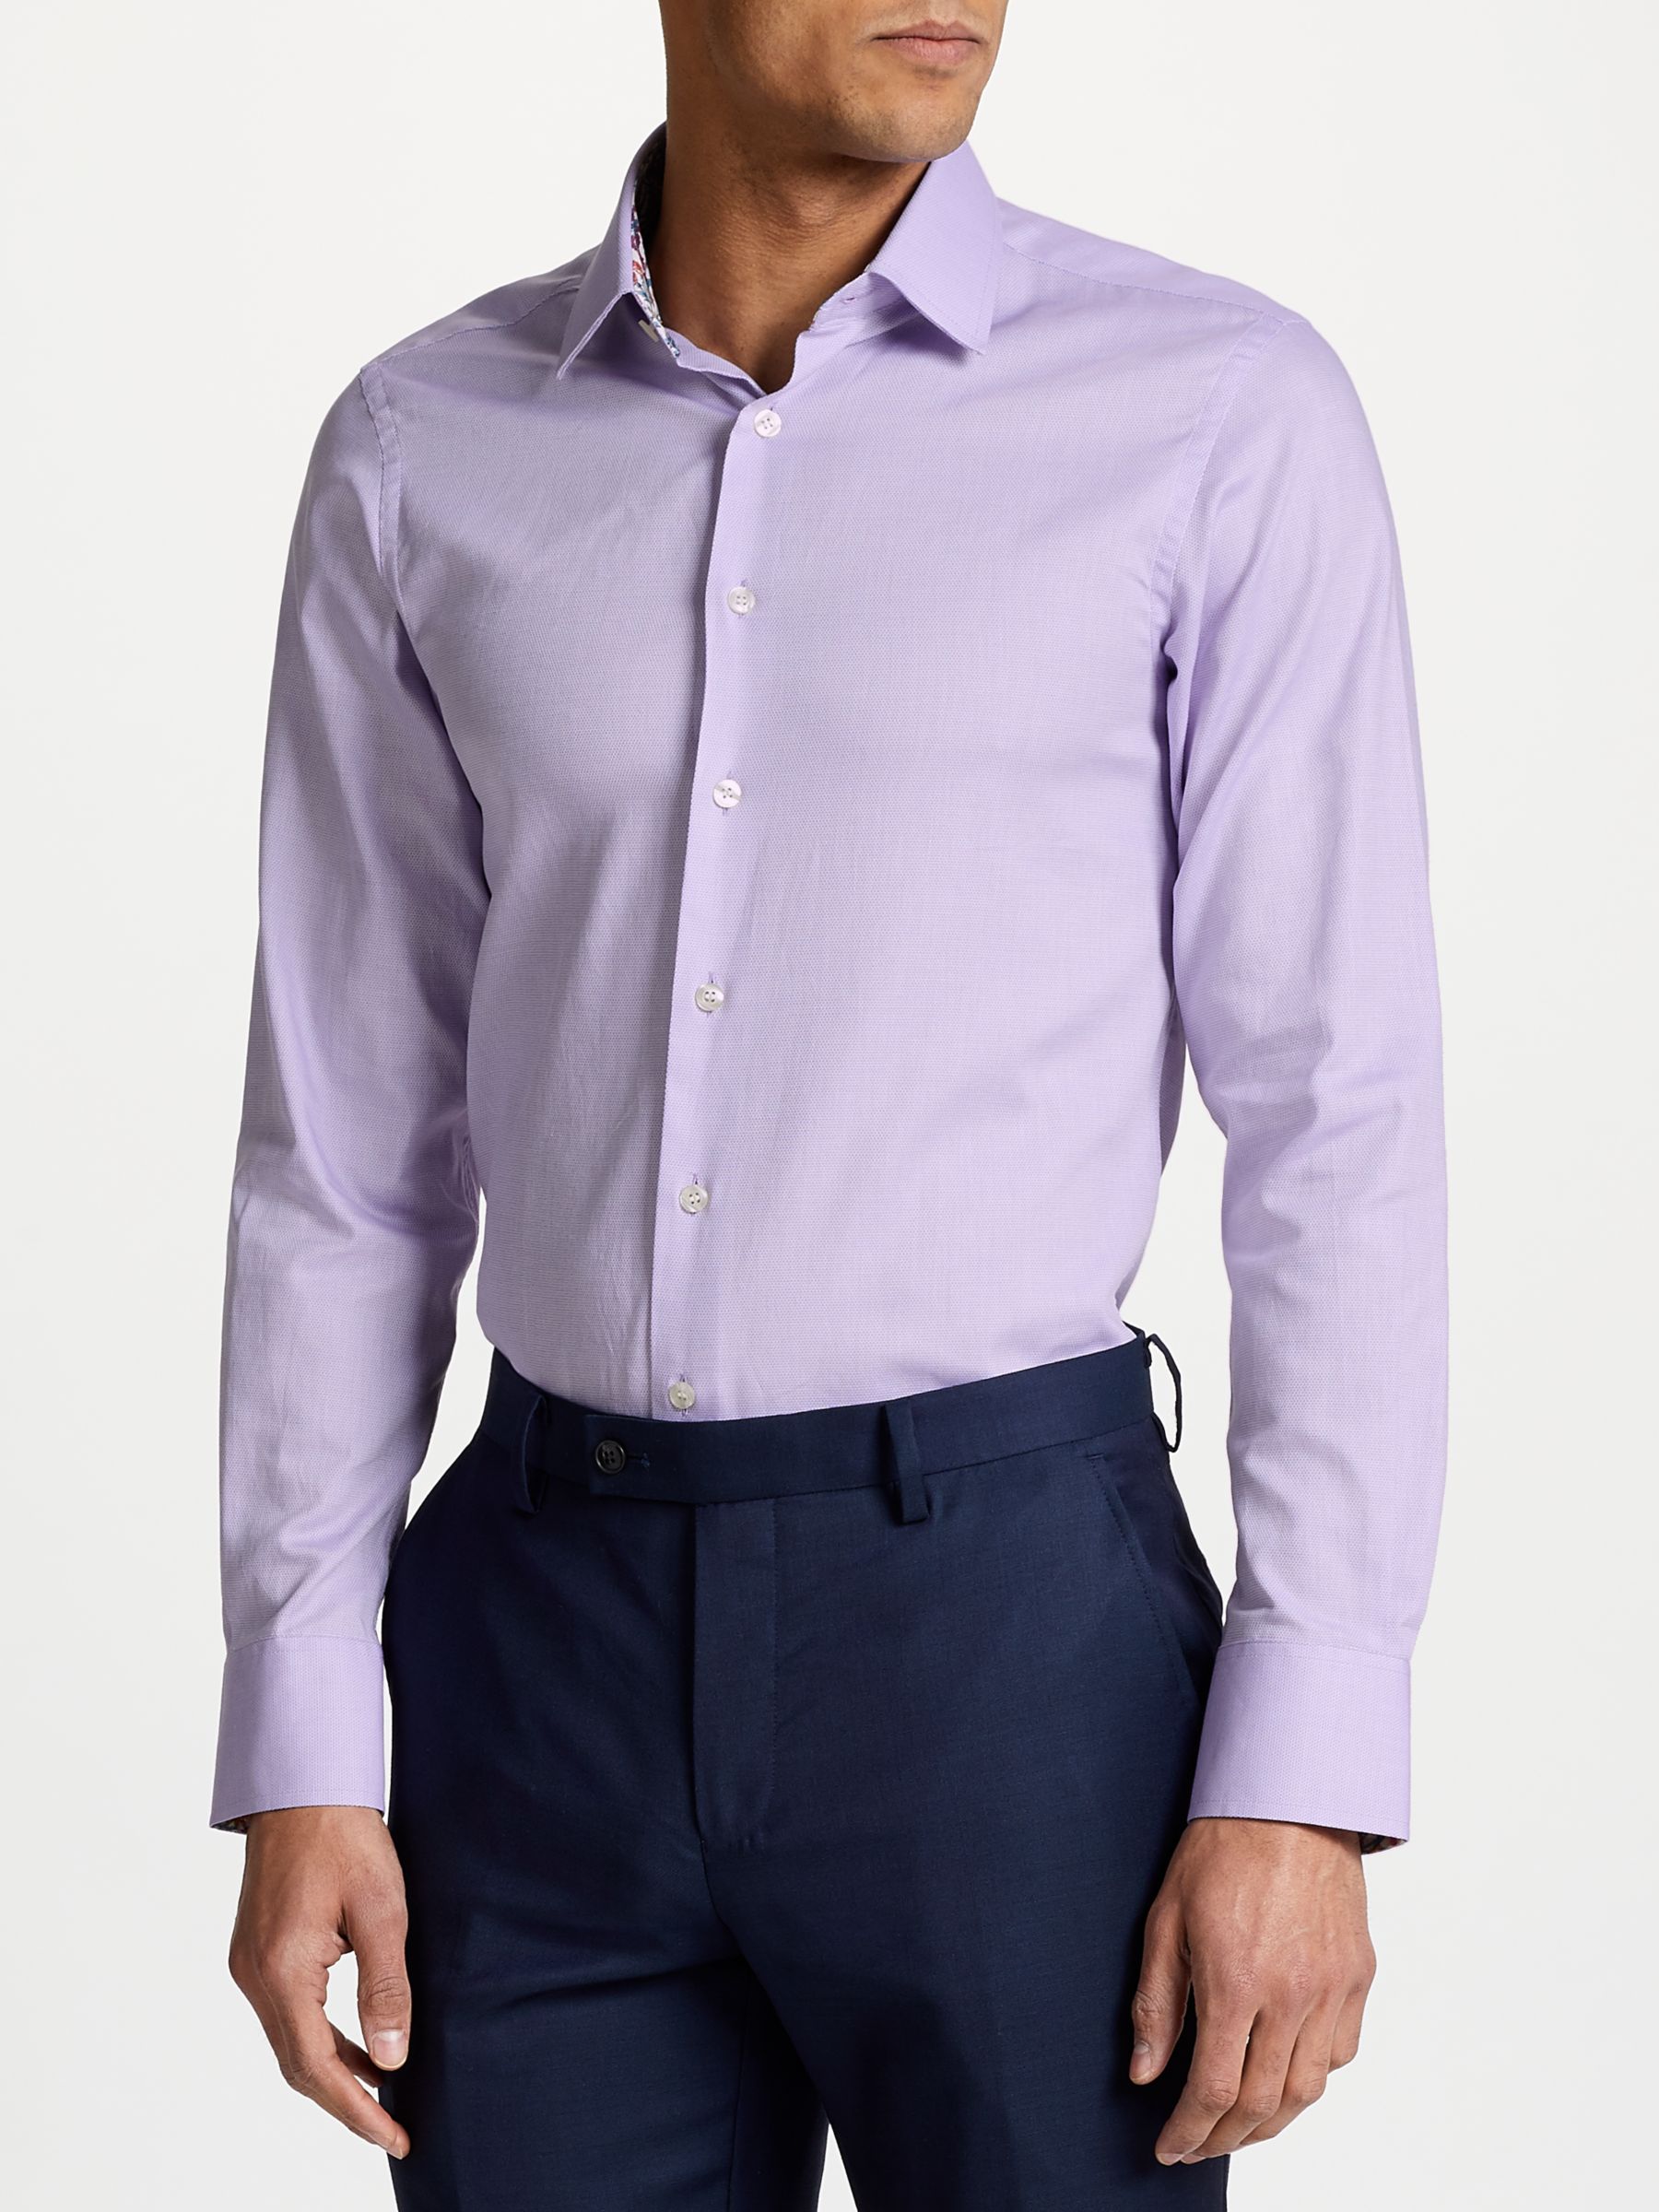 Smyth & Gibson Circle Weave 100s Cotton Slim Fit Shirt, Lilac, 17